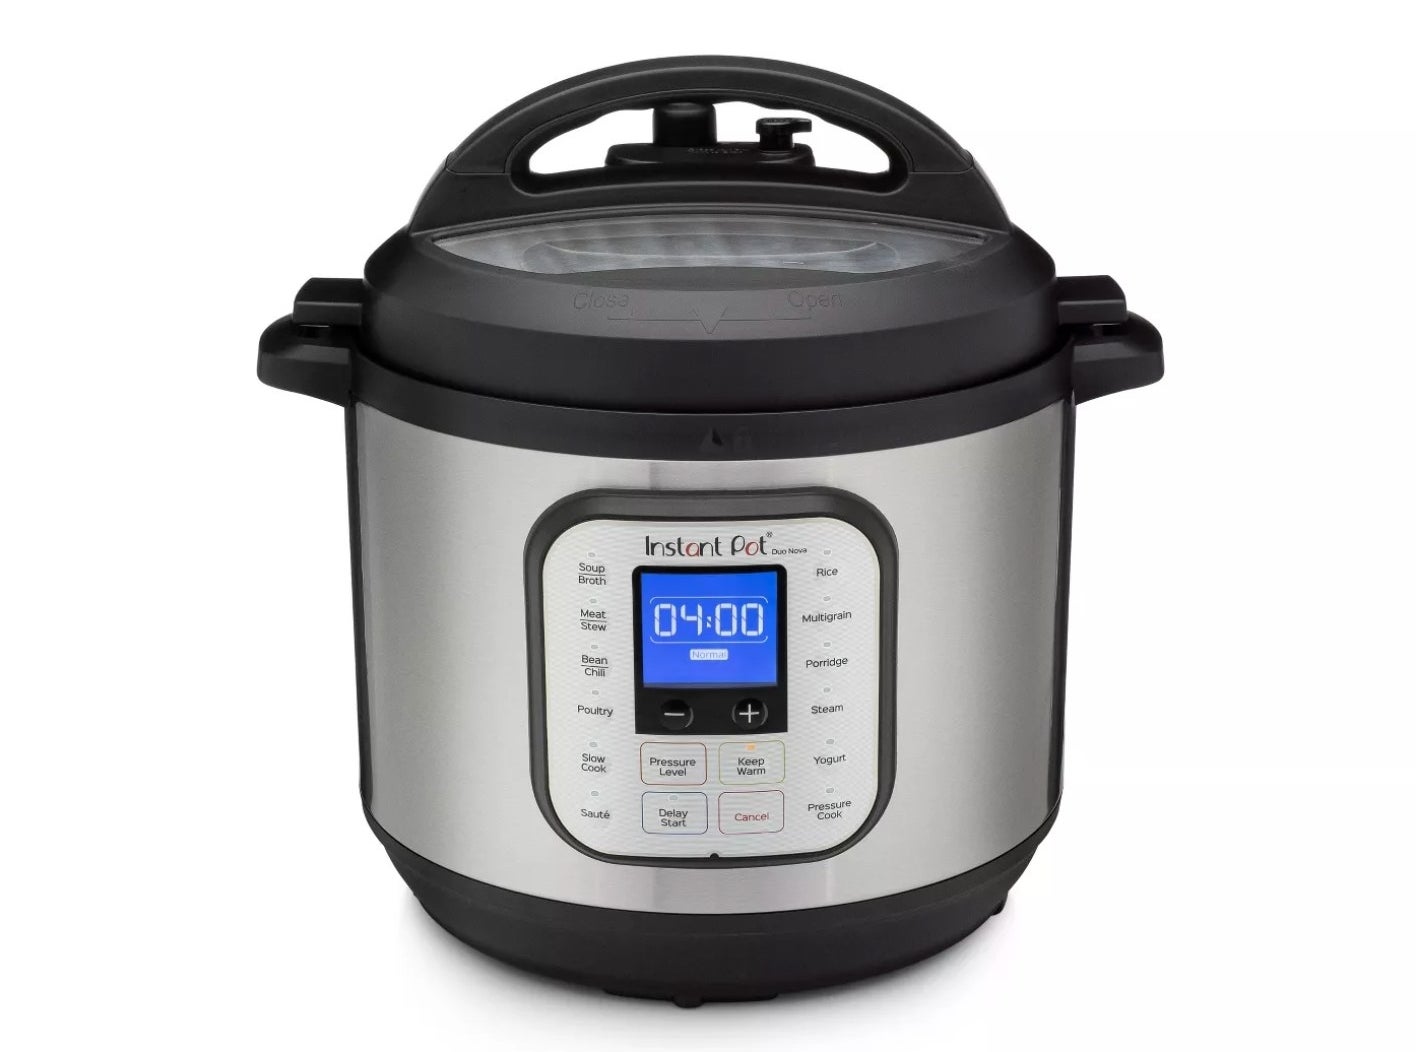 The electric pressure cooker